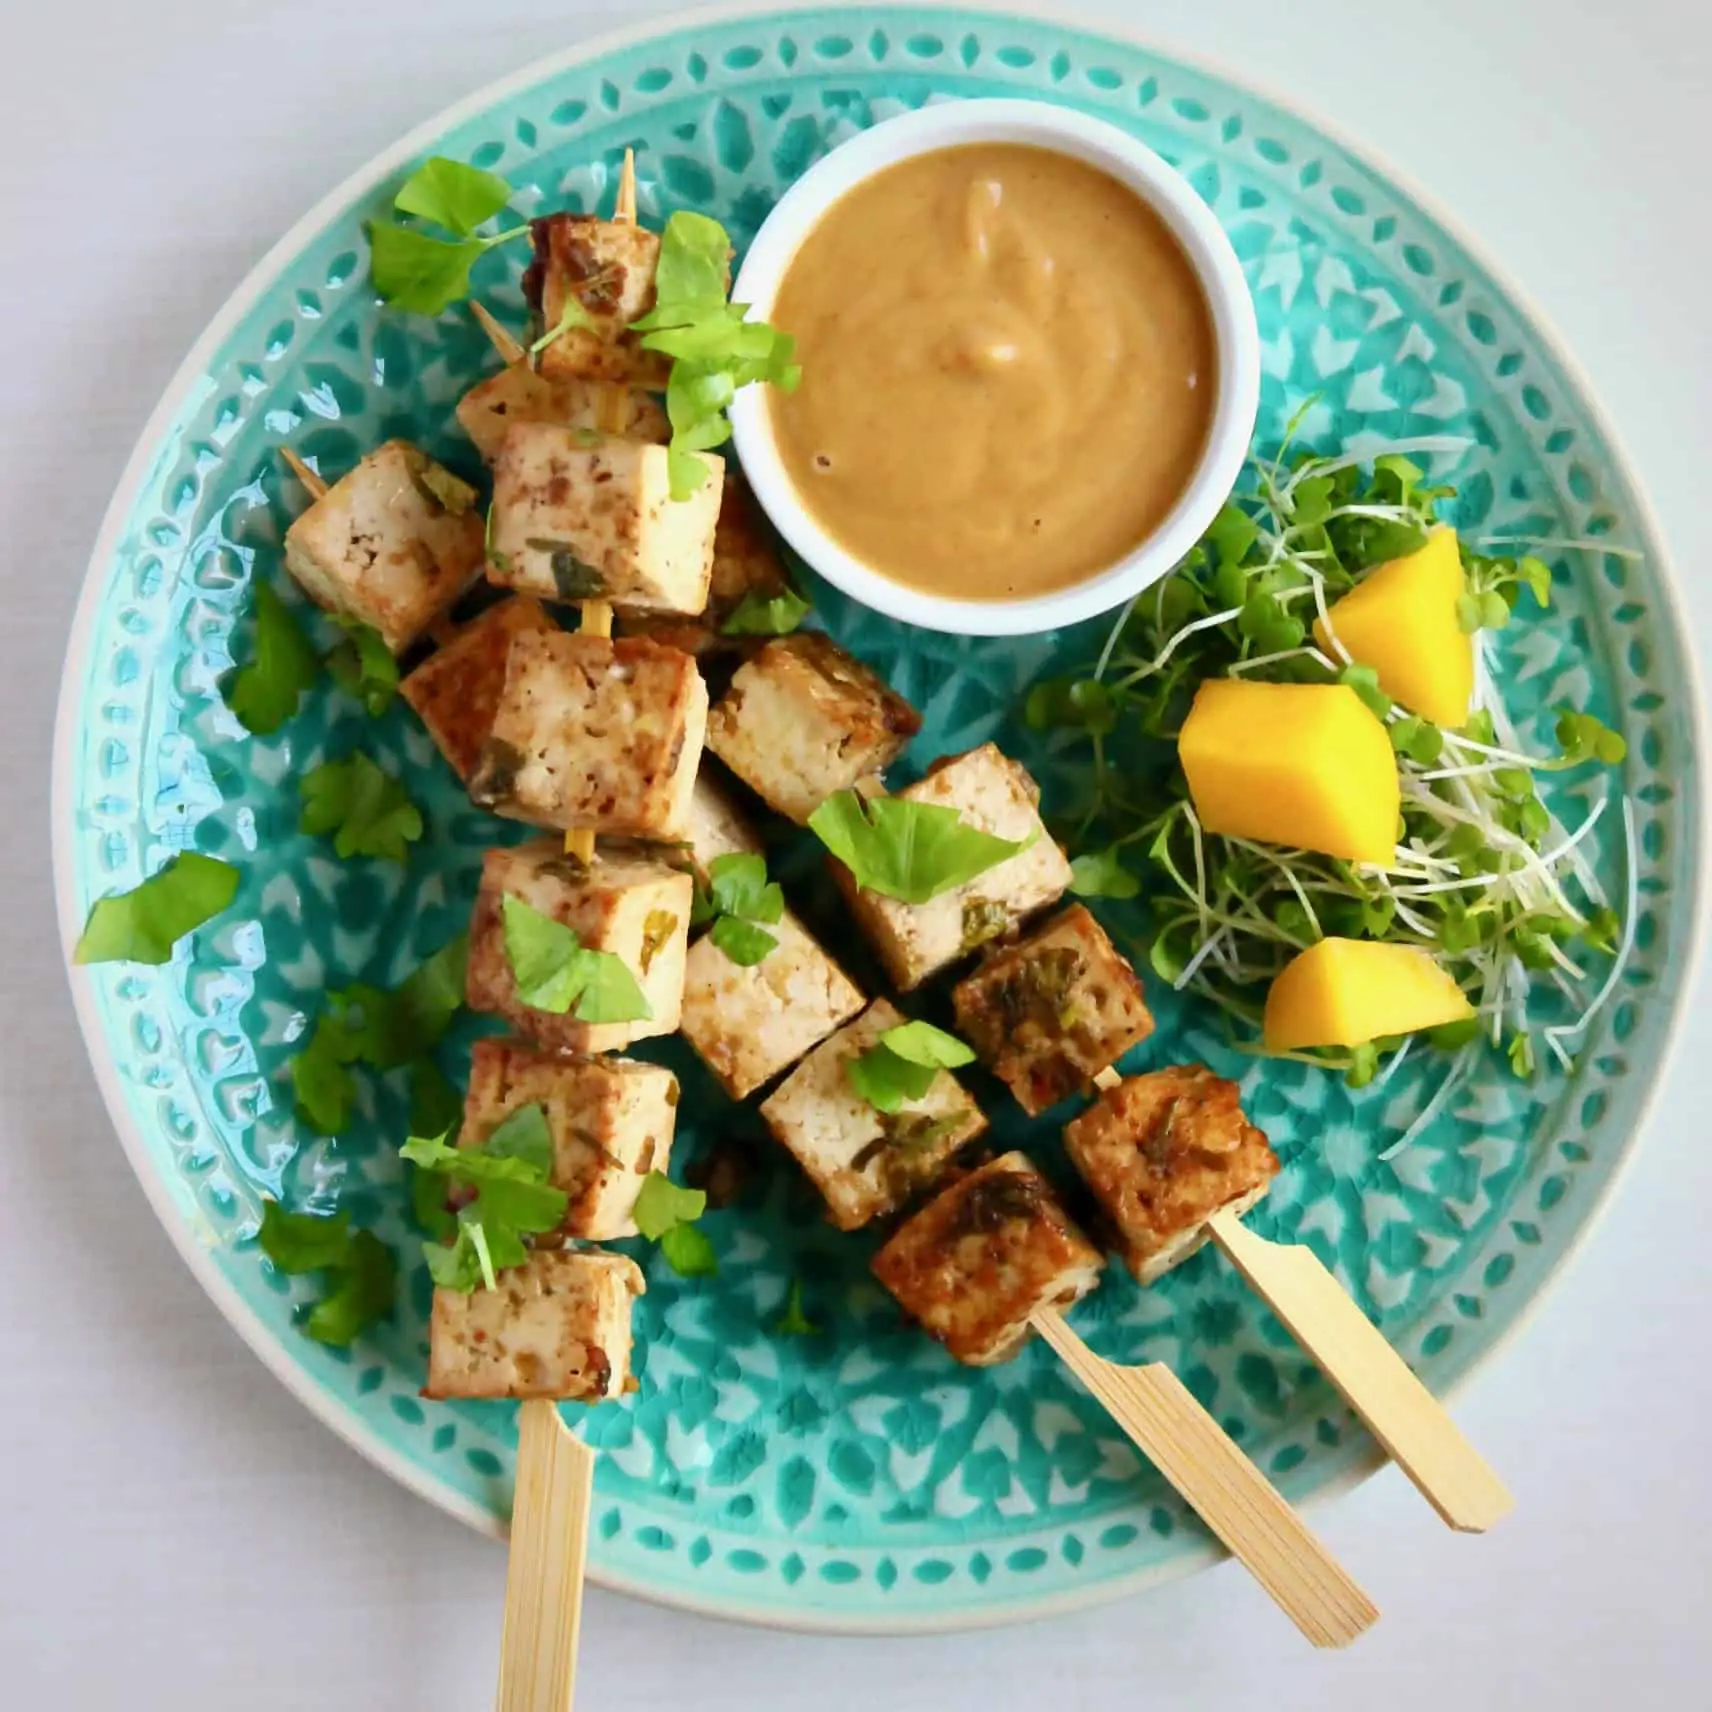 Three skewers with brown tofu cubes on a green plate with a light brown sauce in a white bowl